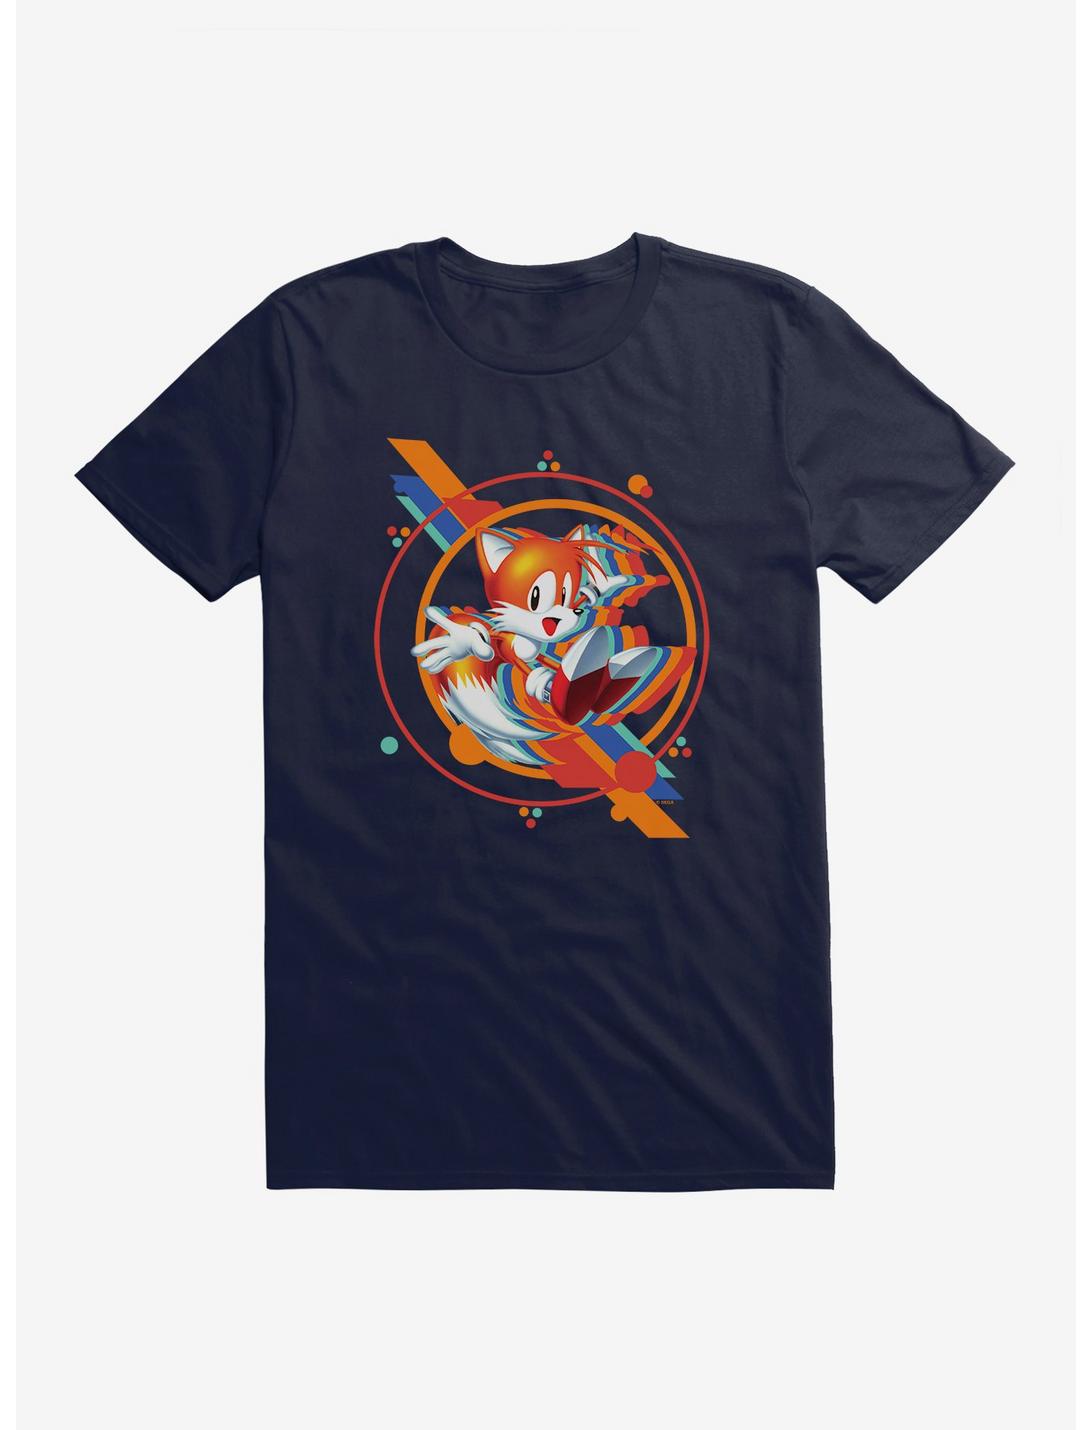 Sonic The Hedgehog Classic Tails T-Shirt, NAVY, hi-res